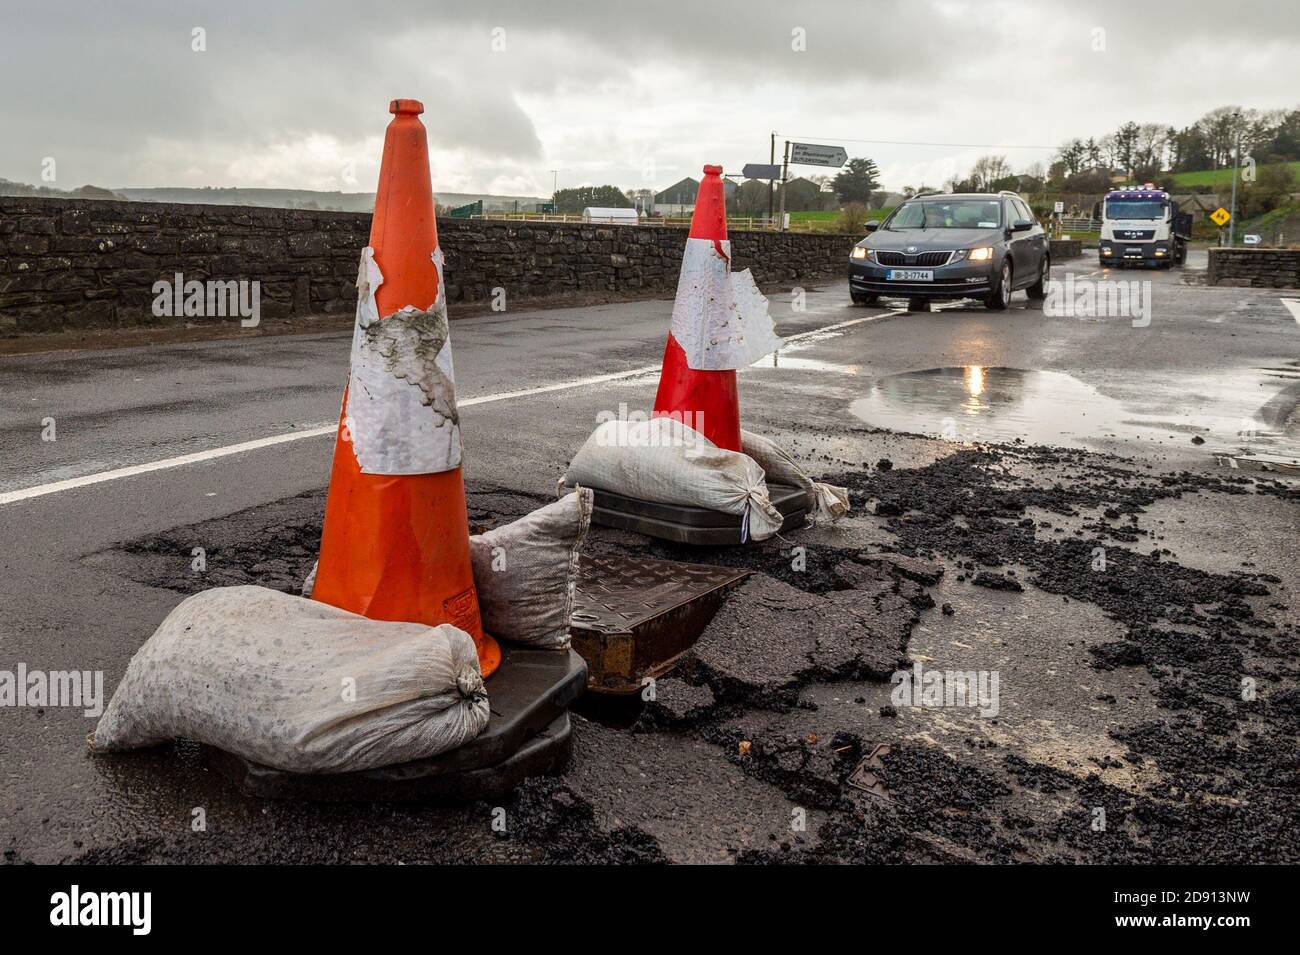 Timoleague, West Cork, Ireland. 2nd Nov, 2020. The road outside Timoleague National School was damaged overnight due to incessant, heavy rain after a Met Eireann Weather Warning. The council placed traffic cones to warn road users of the damage. Credit: AG News/Alamy Live News Stock Photo